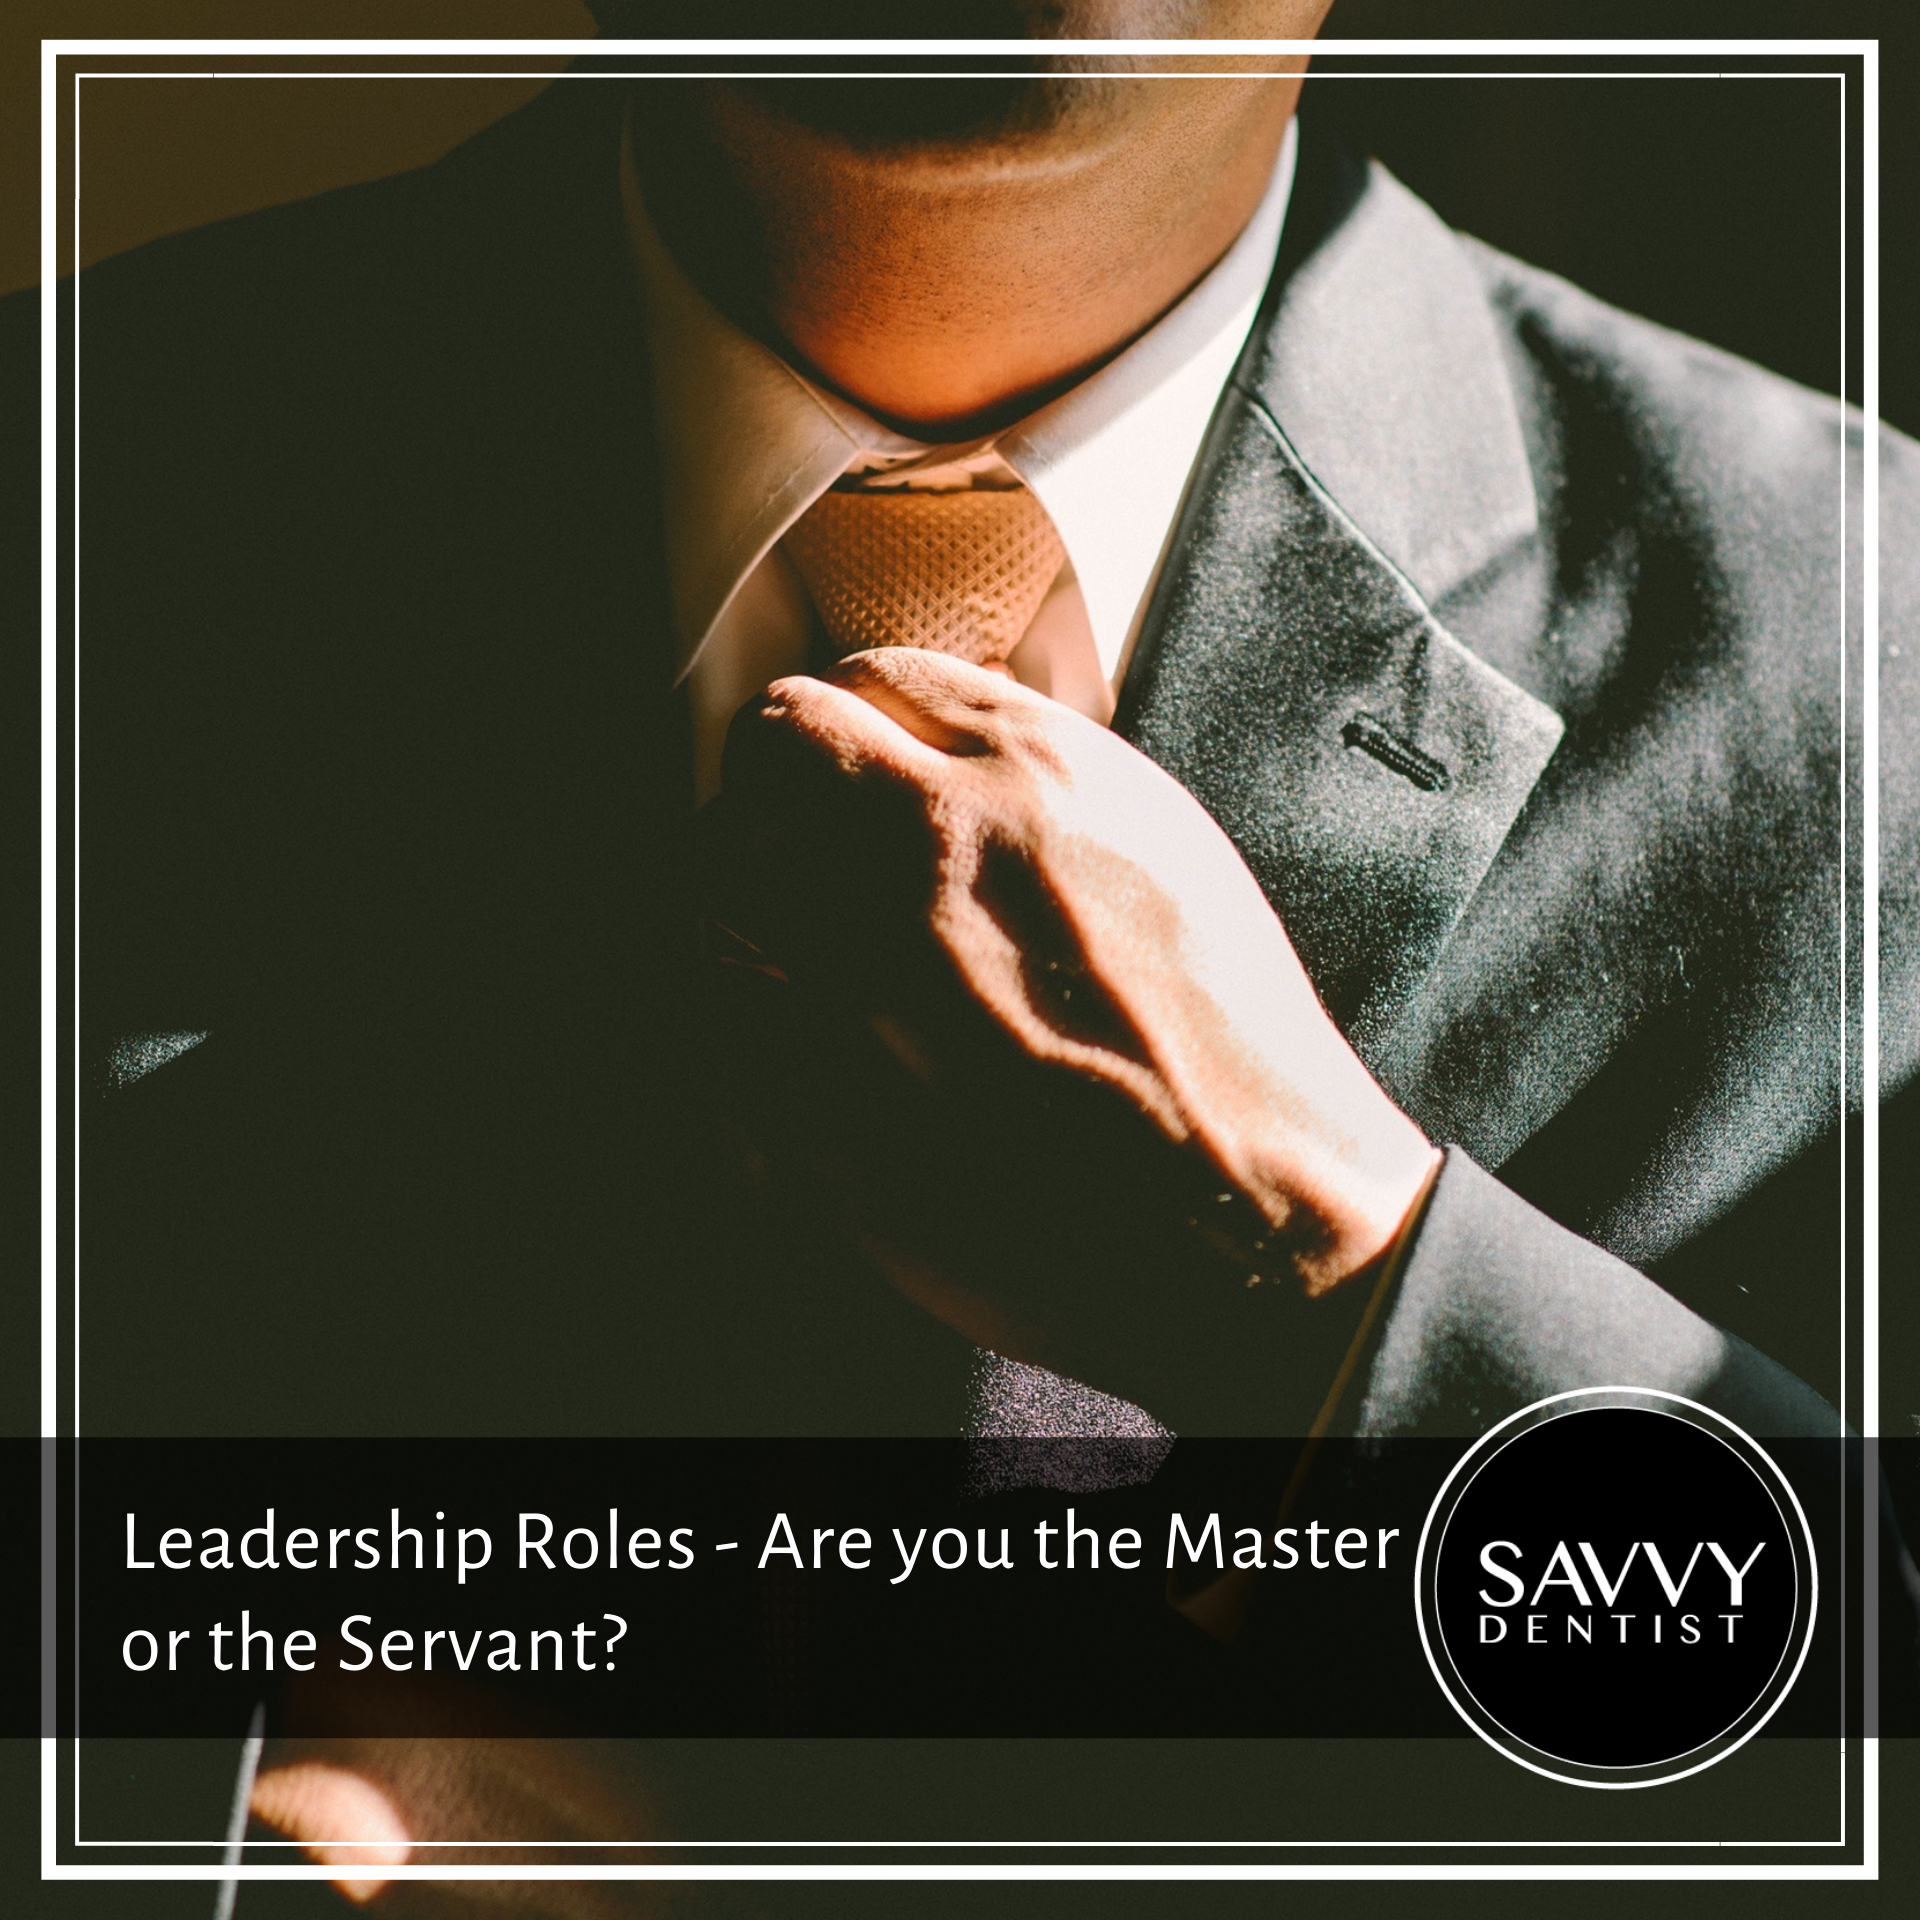 Leadership Roles- Are you the Master or The Servant?